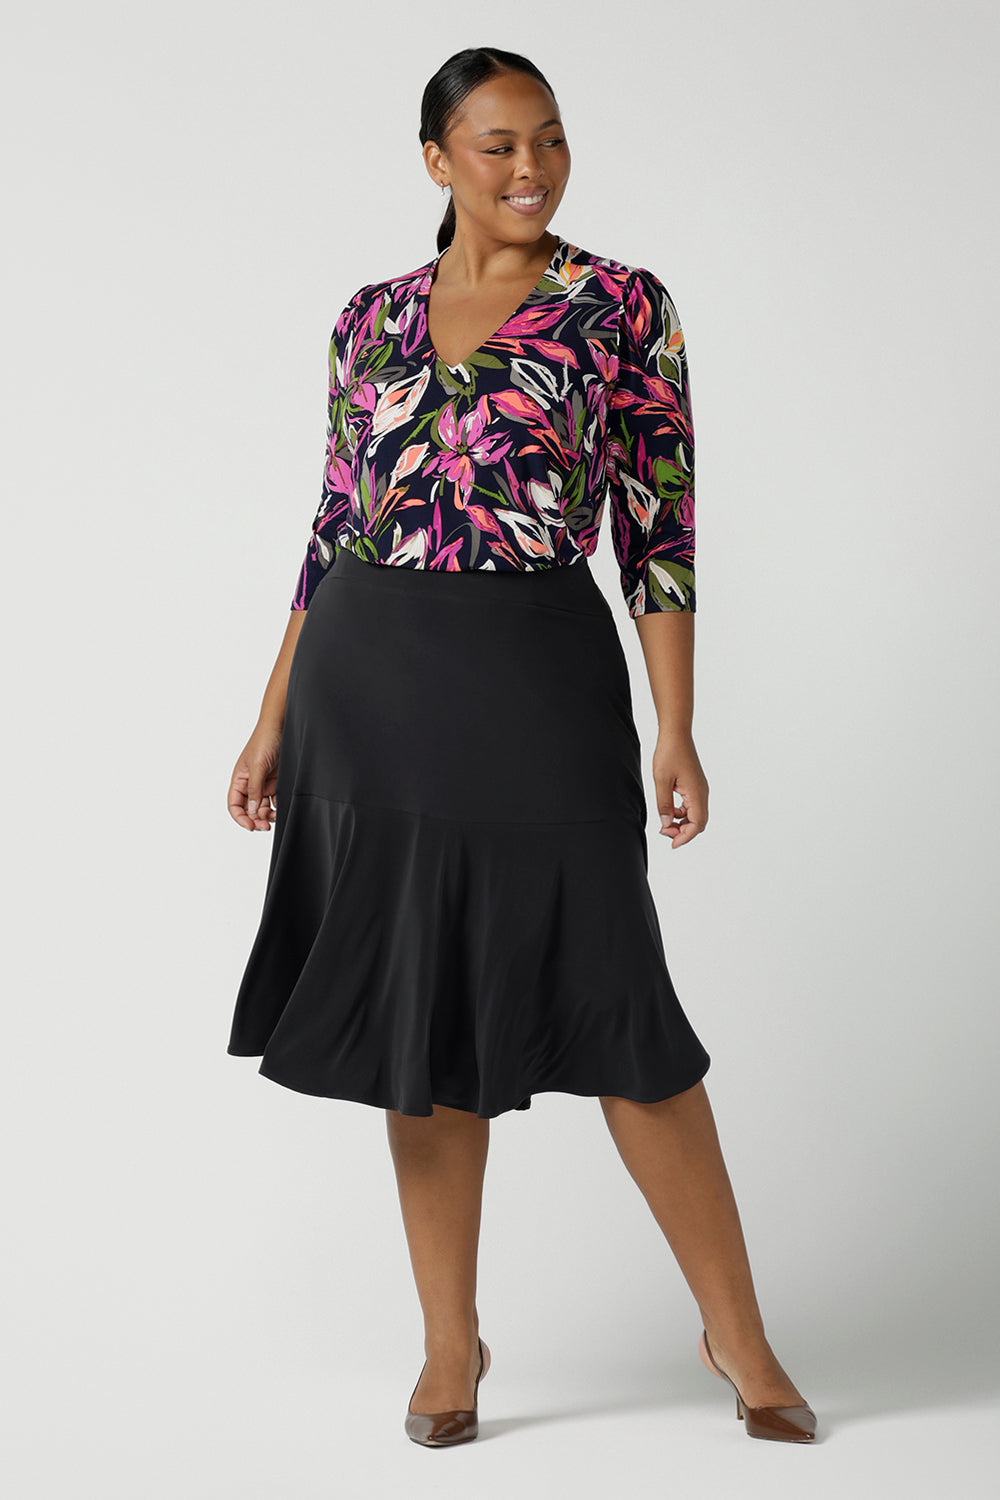 Size 16 woman wears the Vida top in Vivid Flora. A v-neckline style with 3/4 sleeves. Corporate casual work tops. Styled back with the Berit skirt in Charcoal. Made in Australia for women size 8 - 24. 